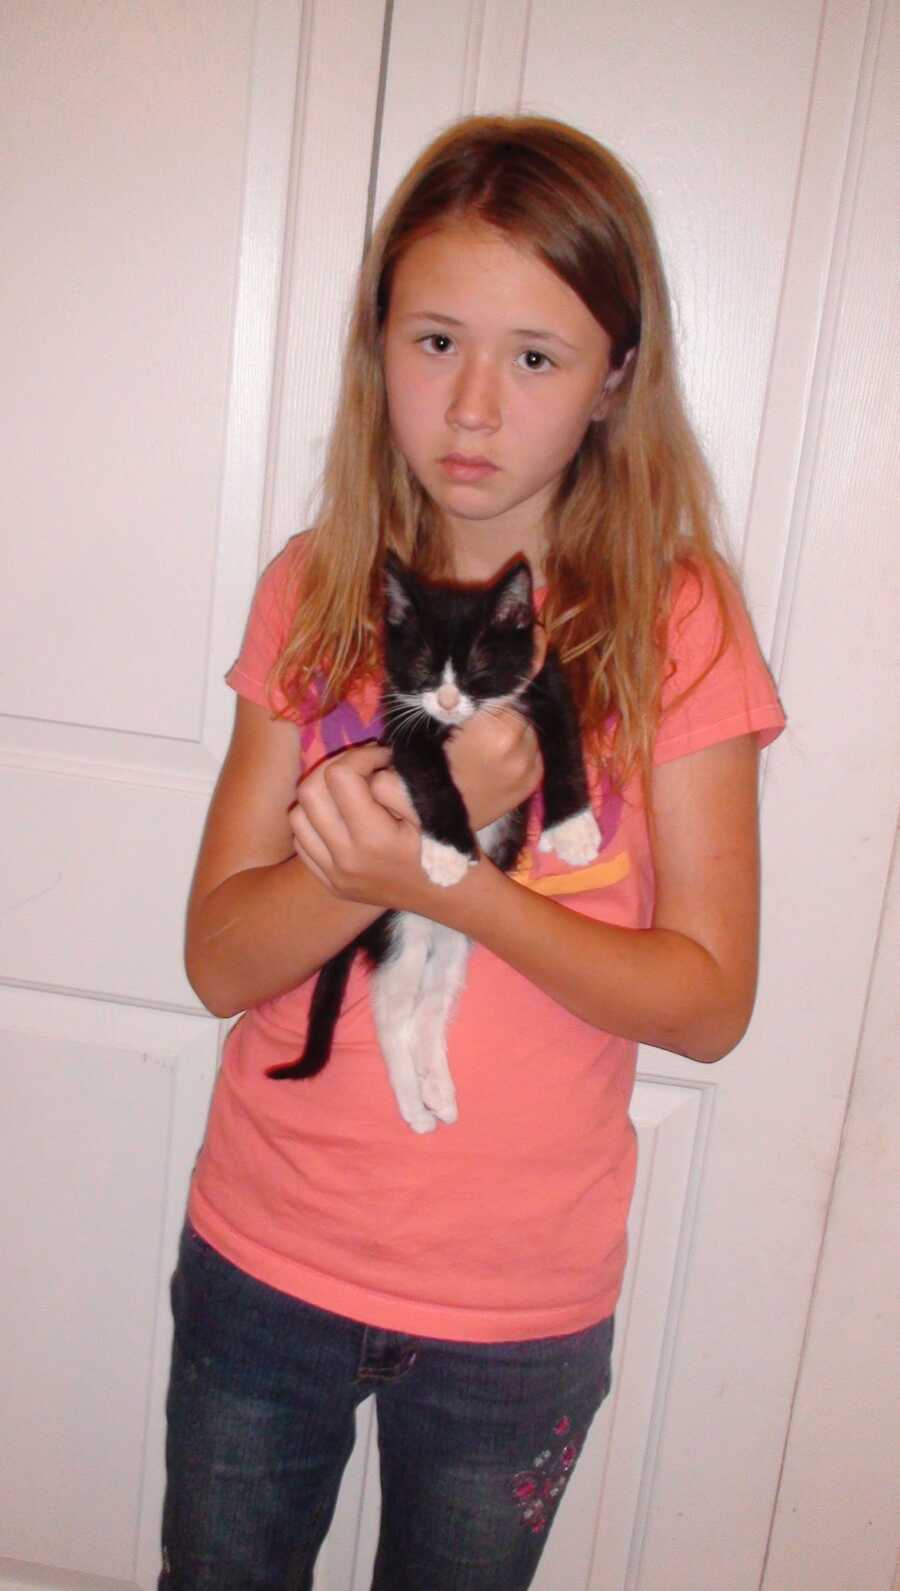 A young girl holding a black and white kitten